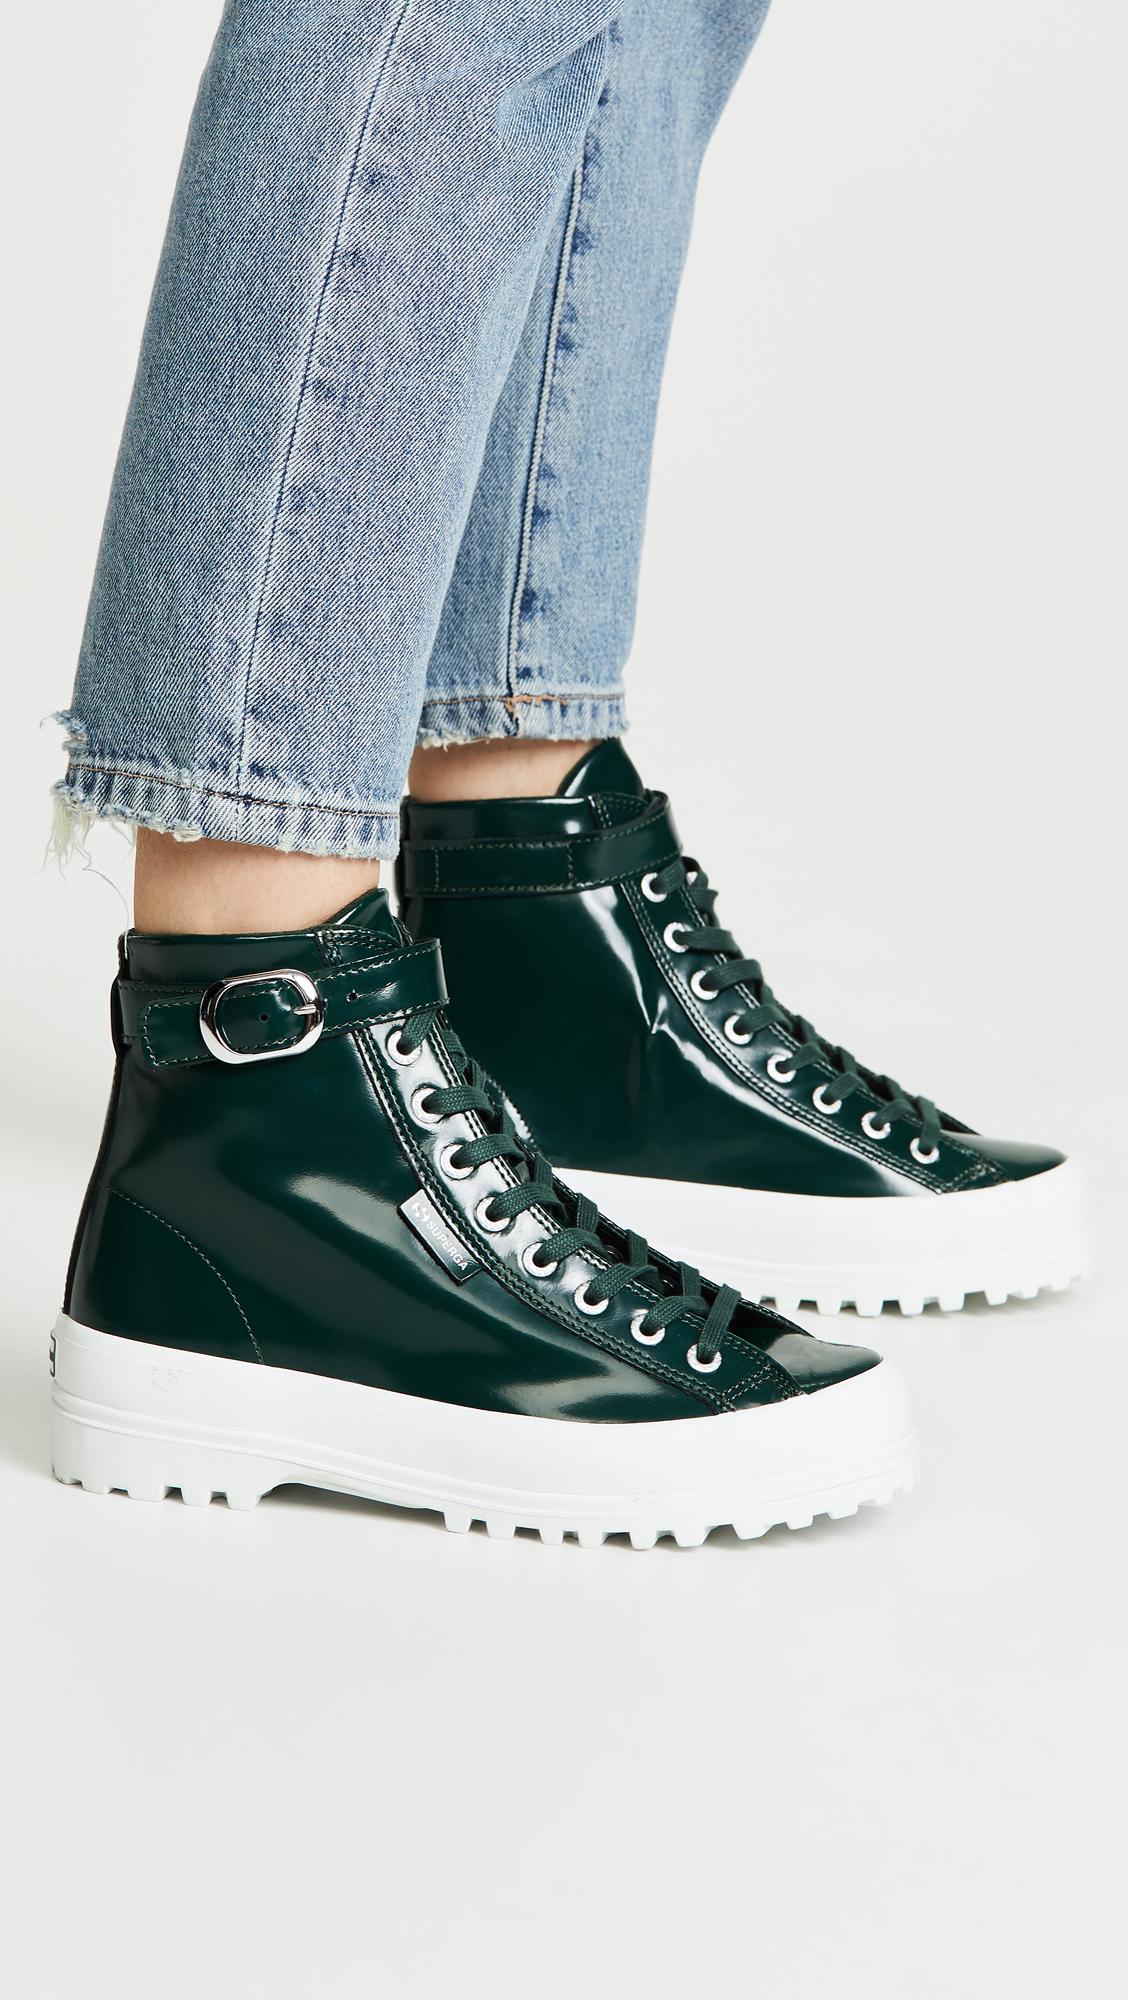 Superga Leather X Alexa Chung 2244 Combat Boot Sneakers in Forest Green  (Green) - Lyst